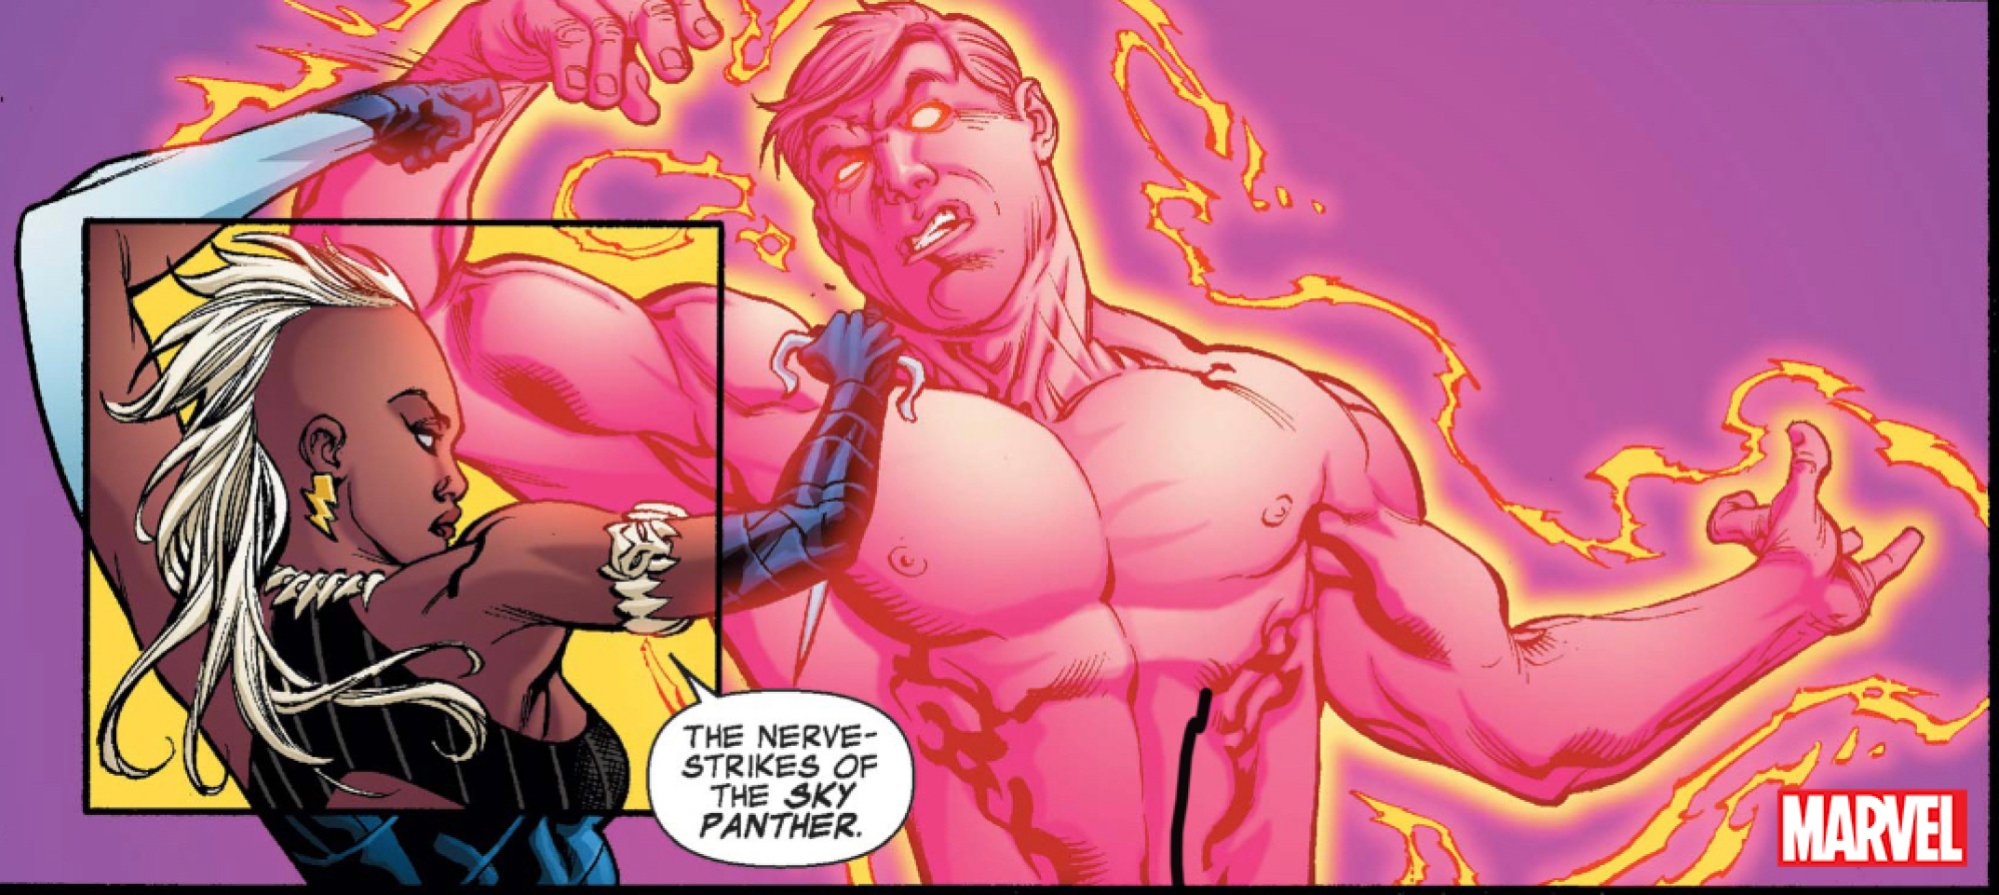 A Marvel comic panel showing Sky Panther.